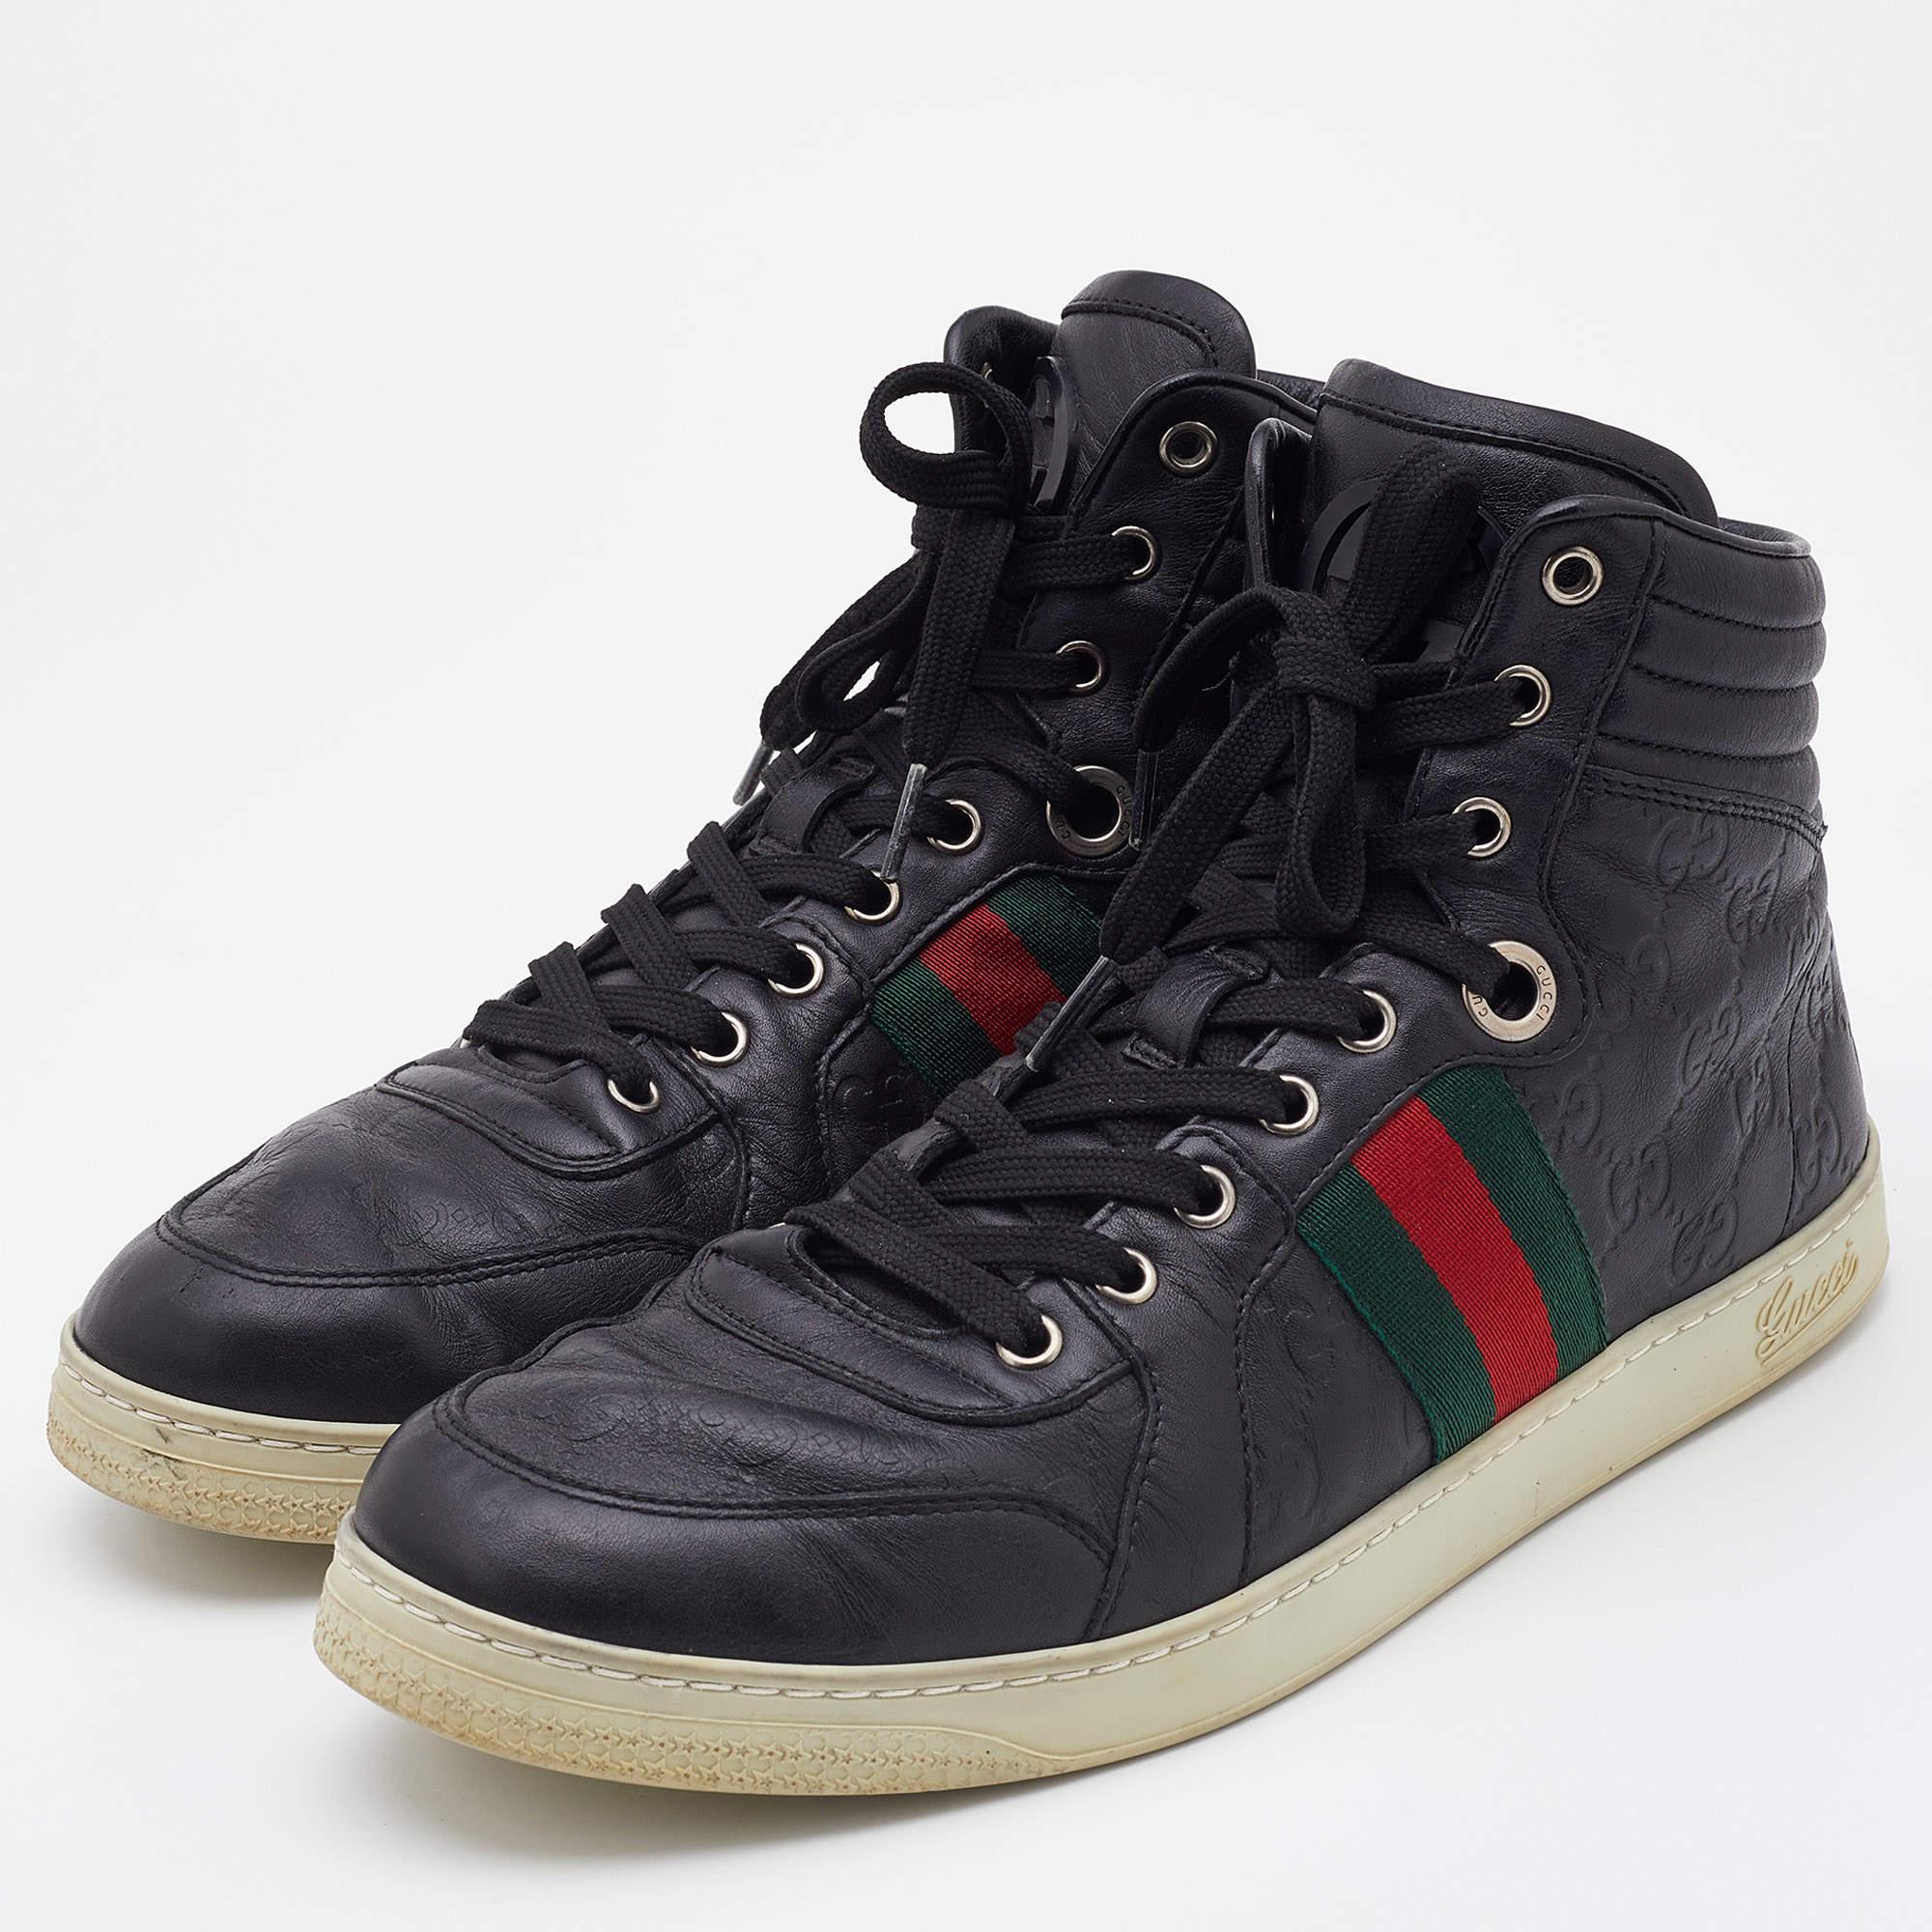 Men's Gucci Black Guccissima Leather Web Detail High Top Sneakers Size 41.5 For Sale